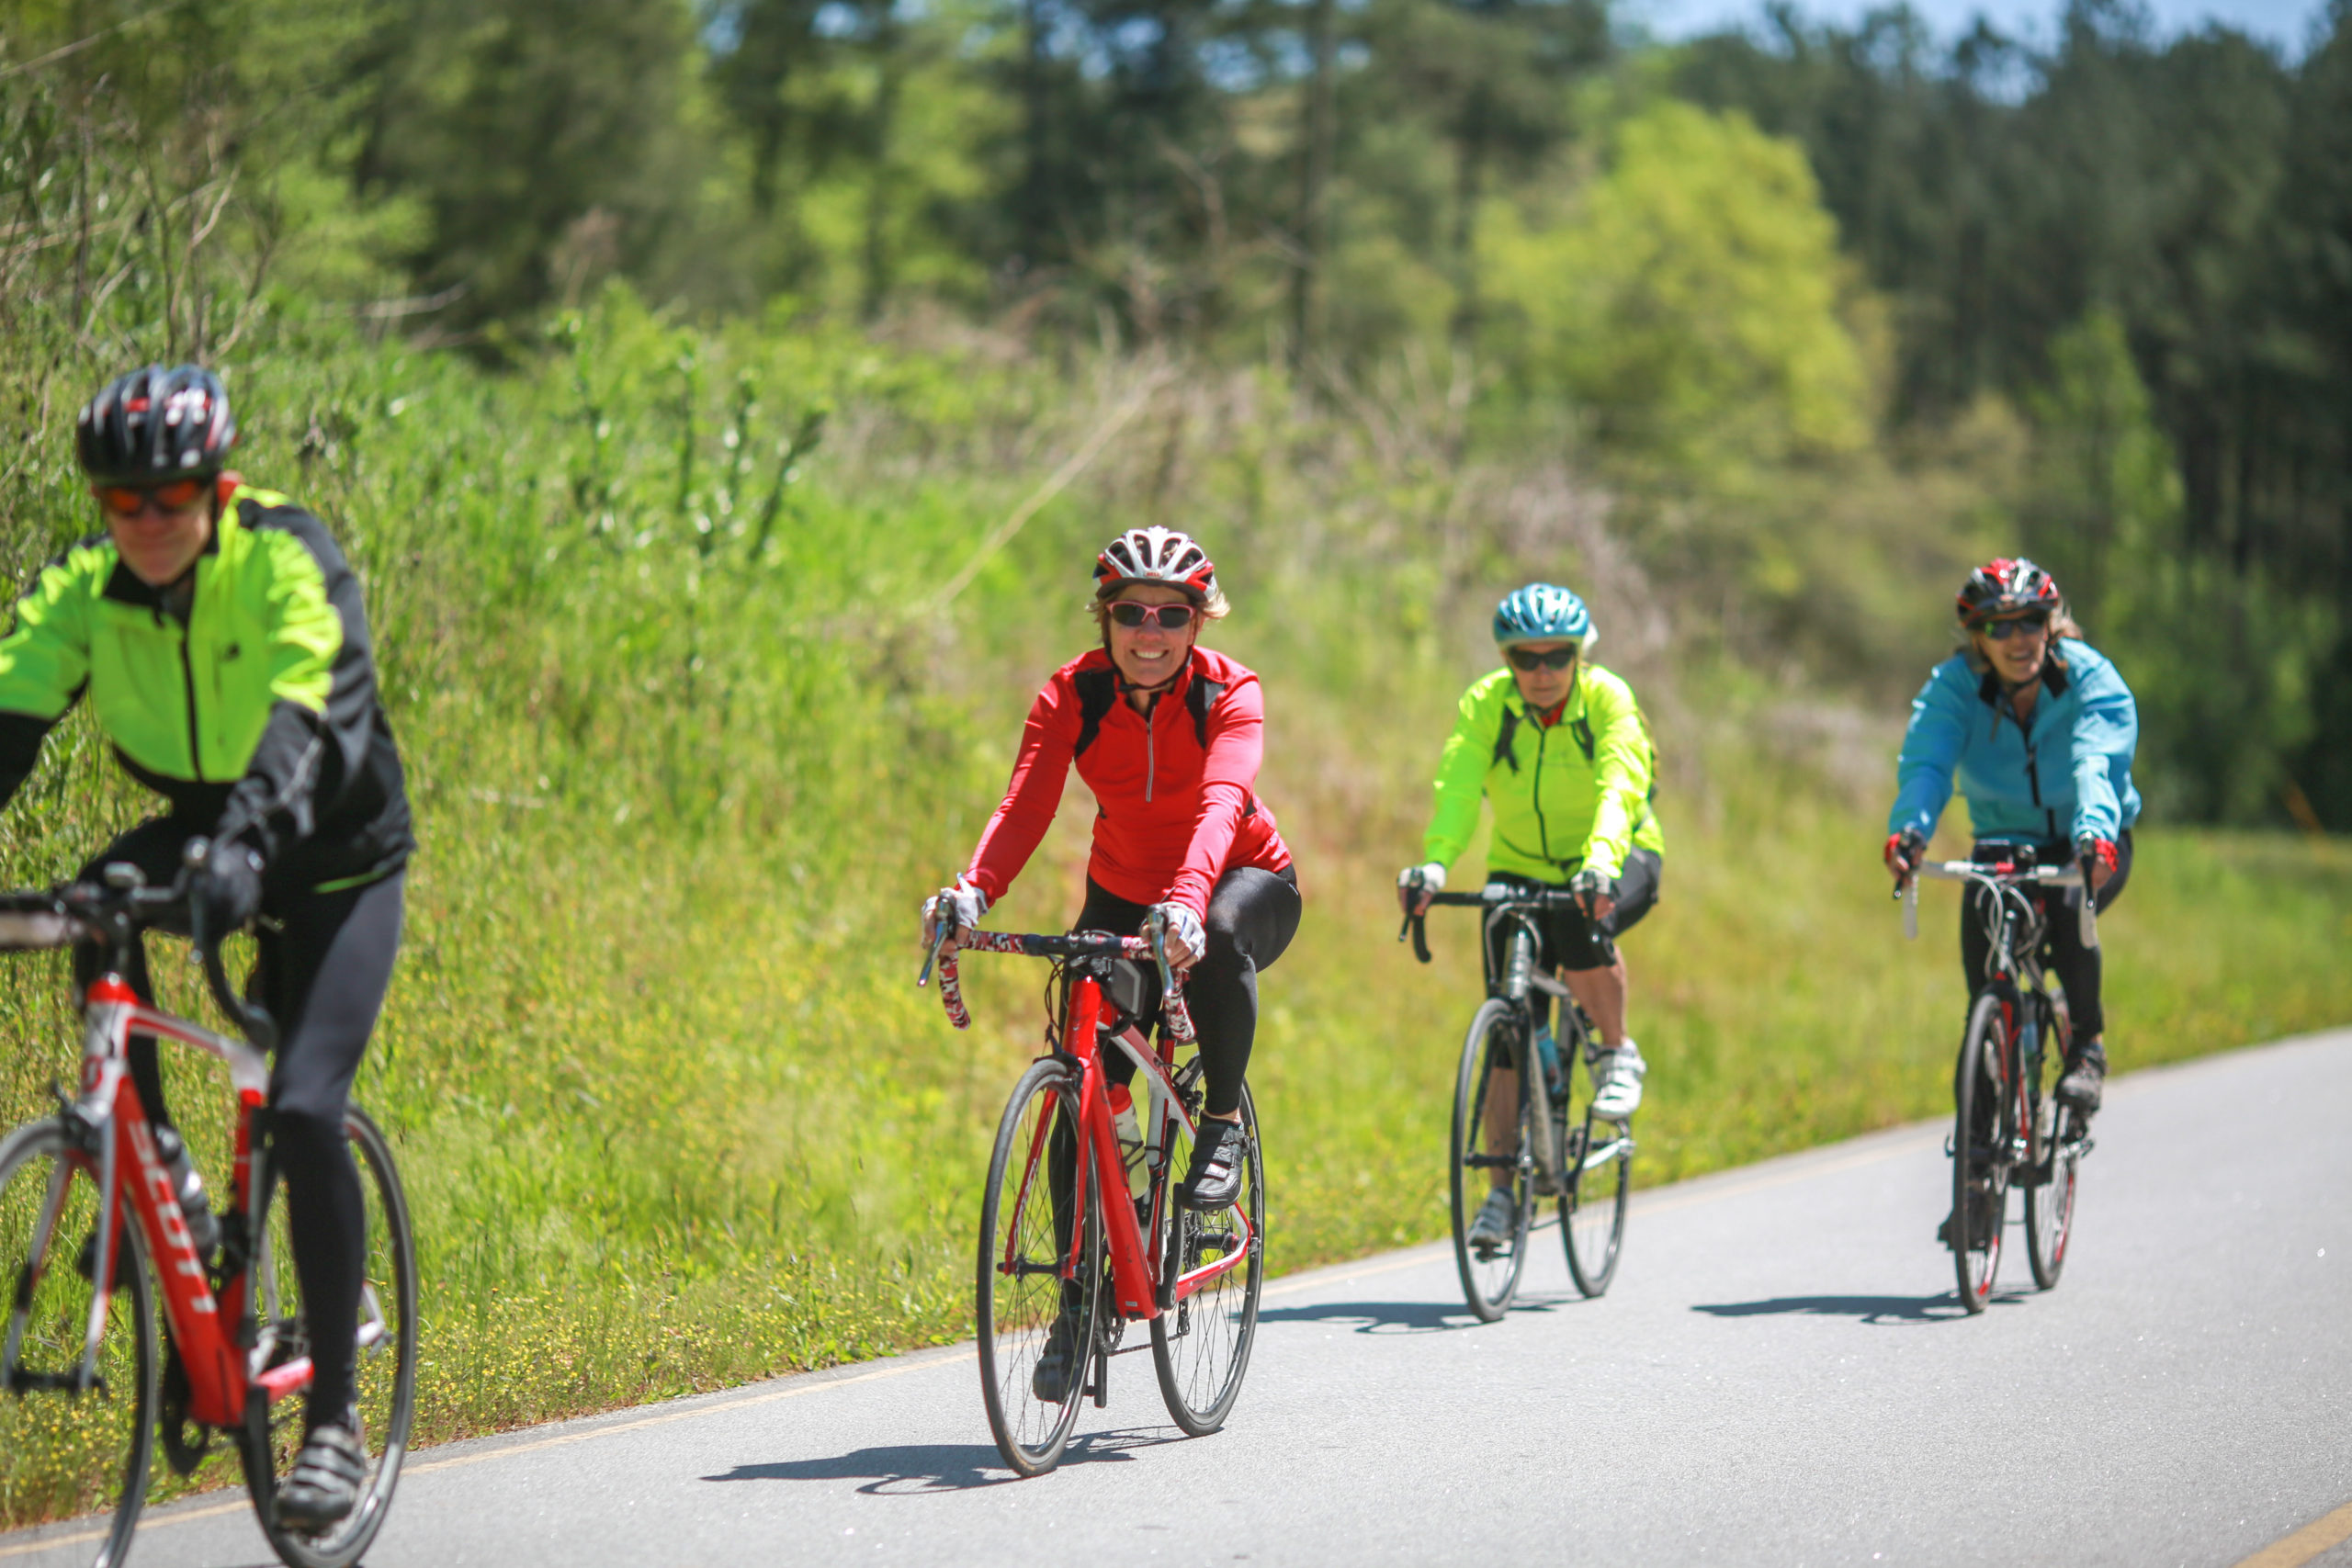 Bicyclists enjoy the Madison-Morgan Meander on a country road | Georgia Attractions | Things to Do in Madison Georgia | Visit Madison GA